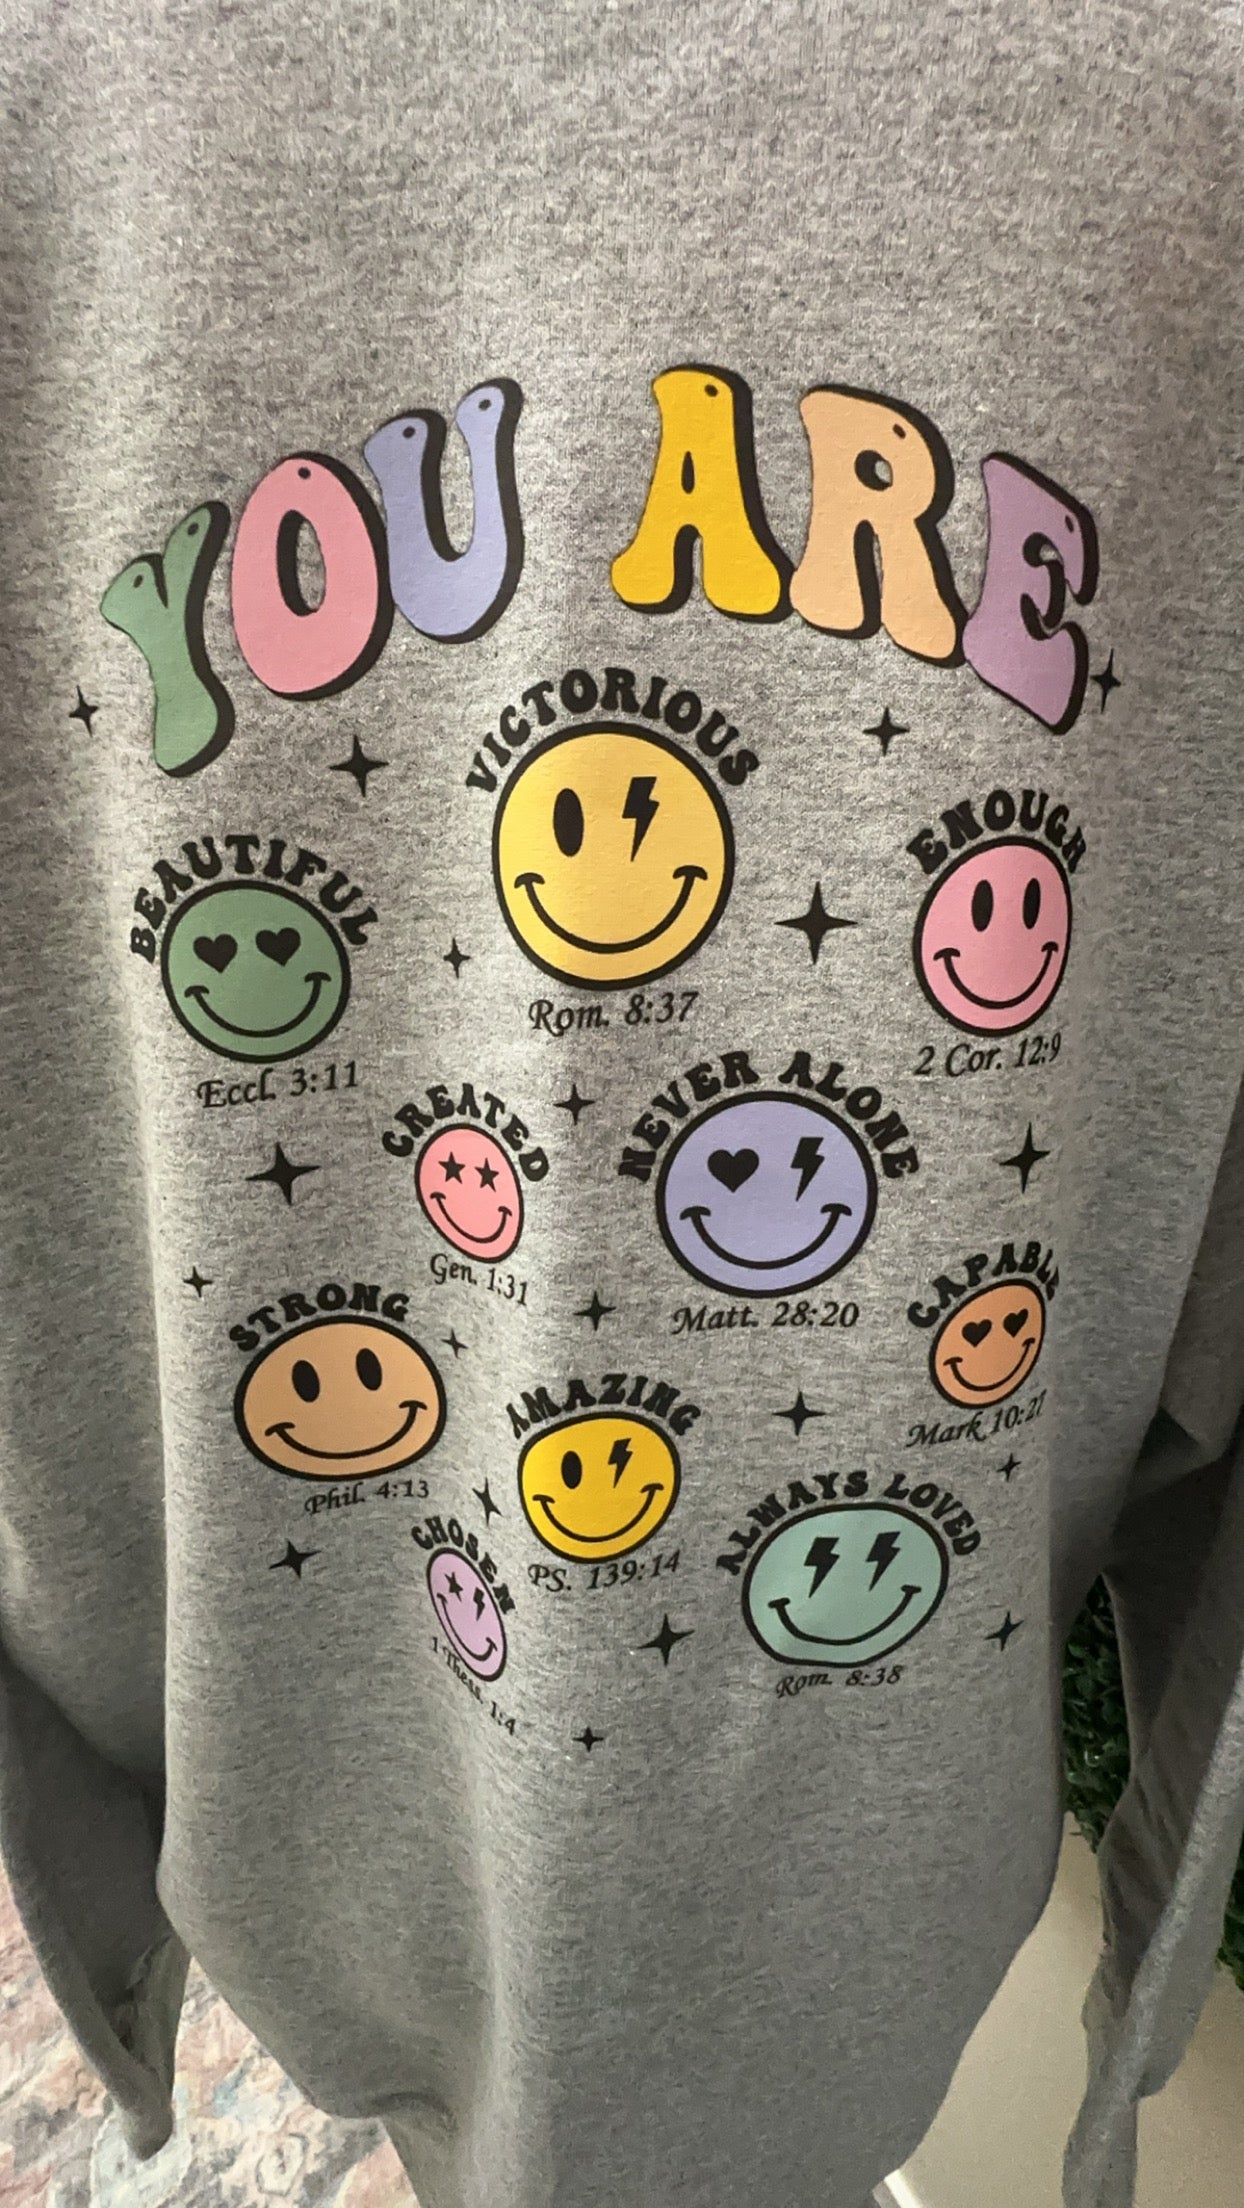 The”You Are” Sweatshirt